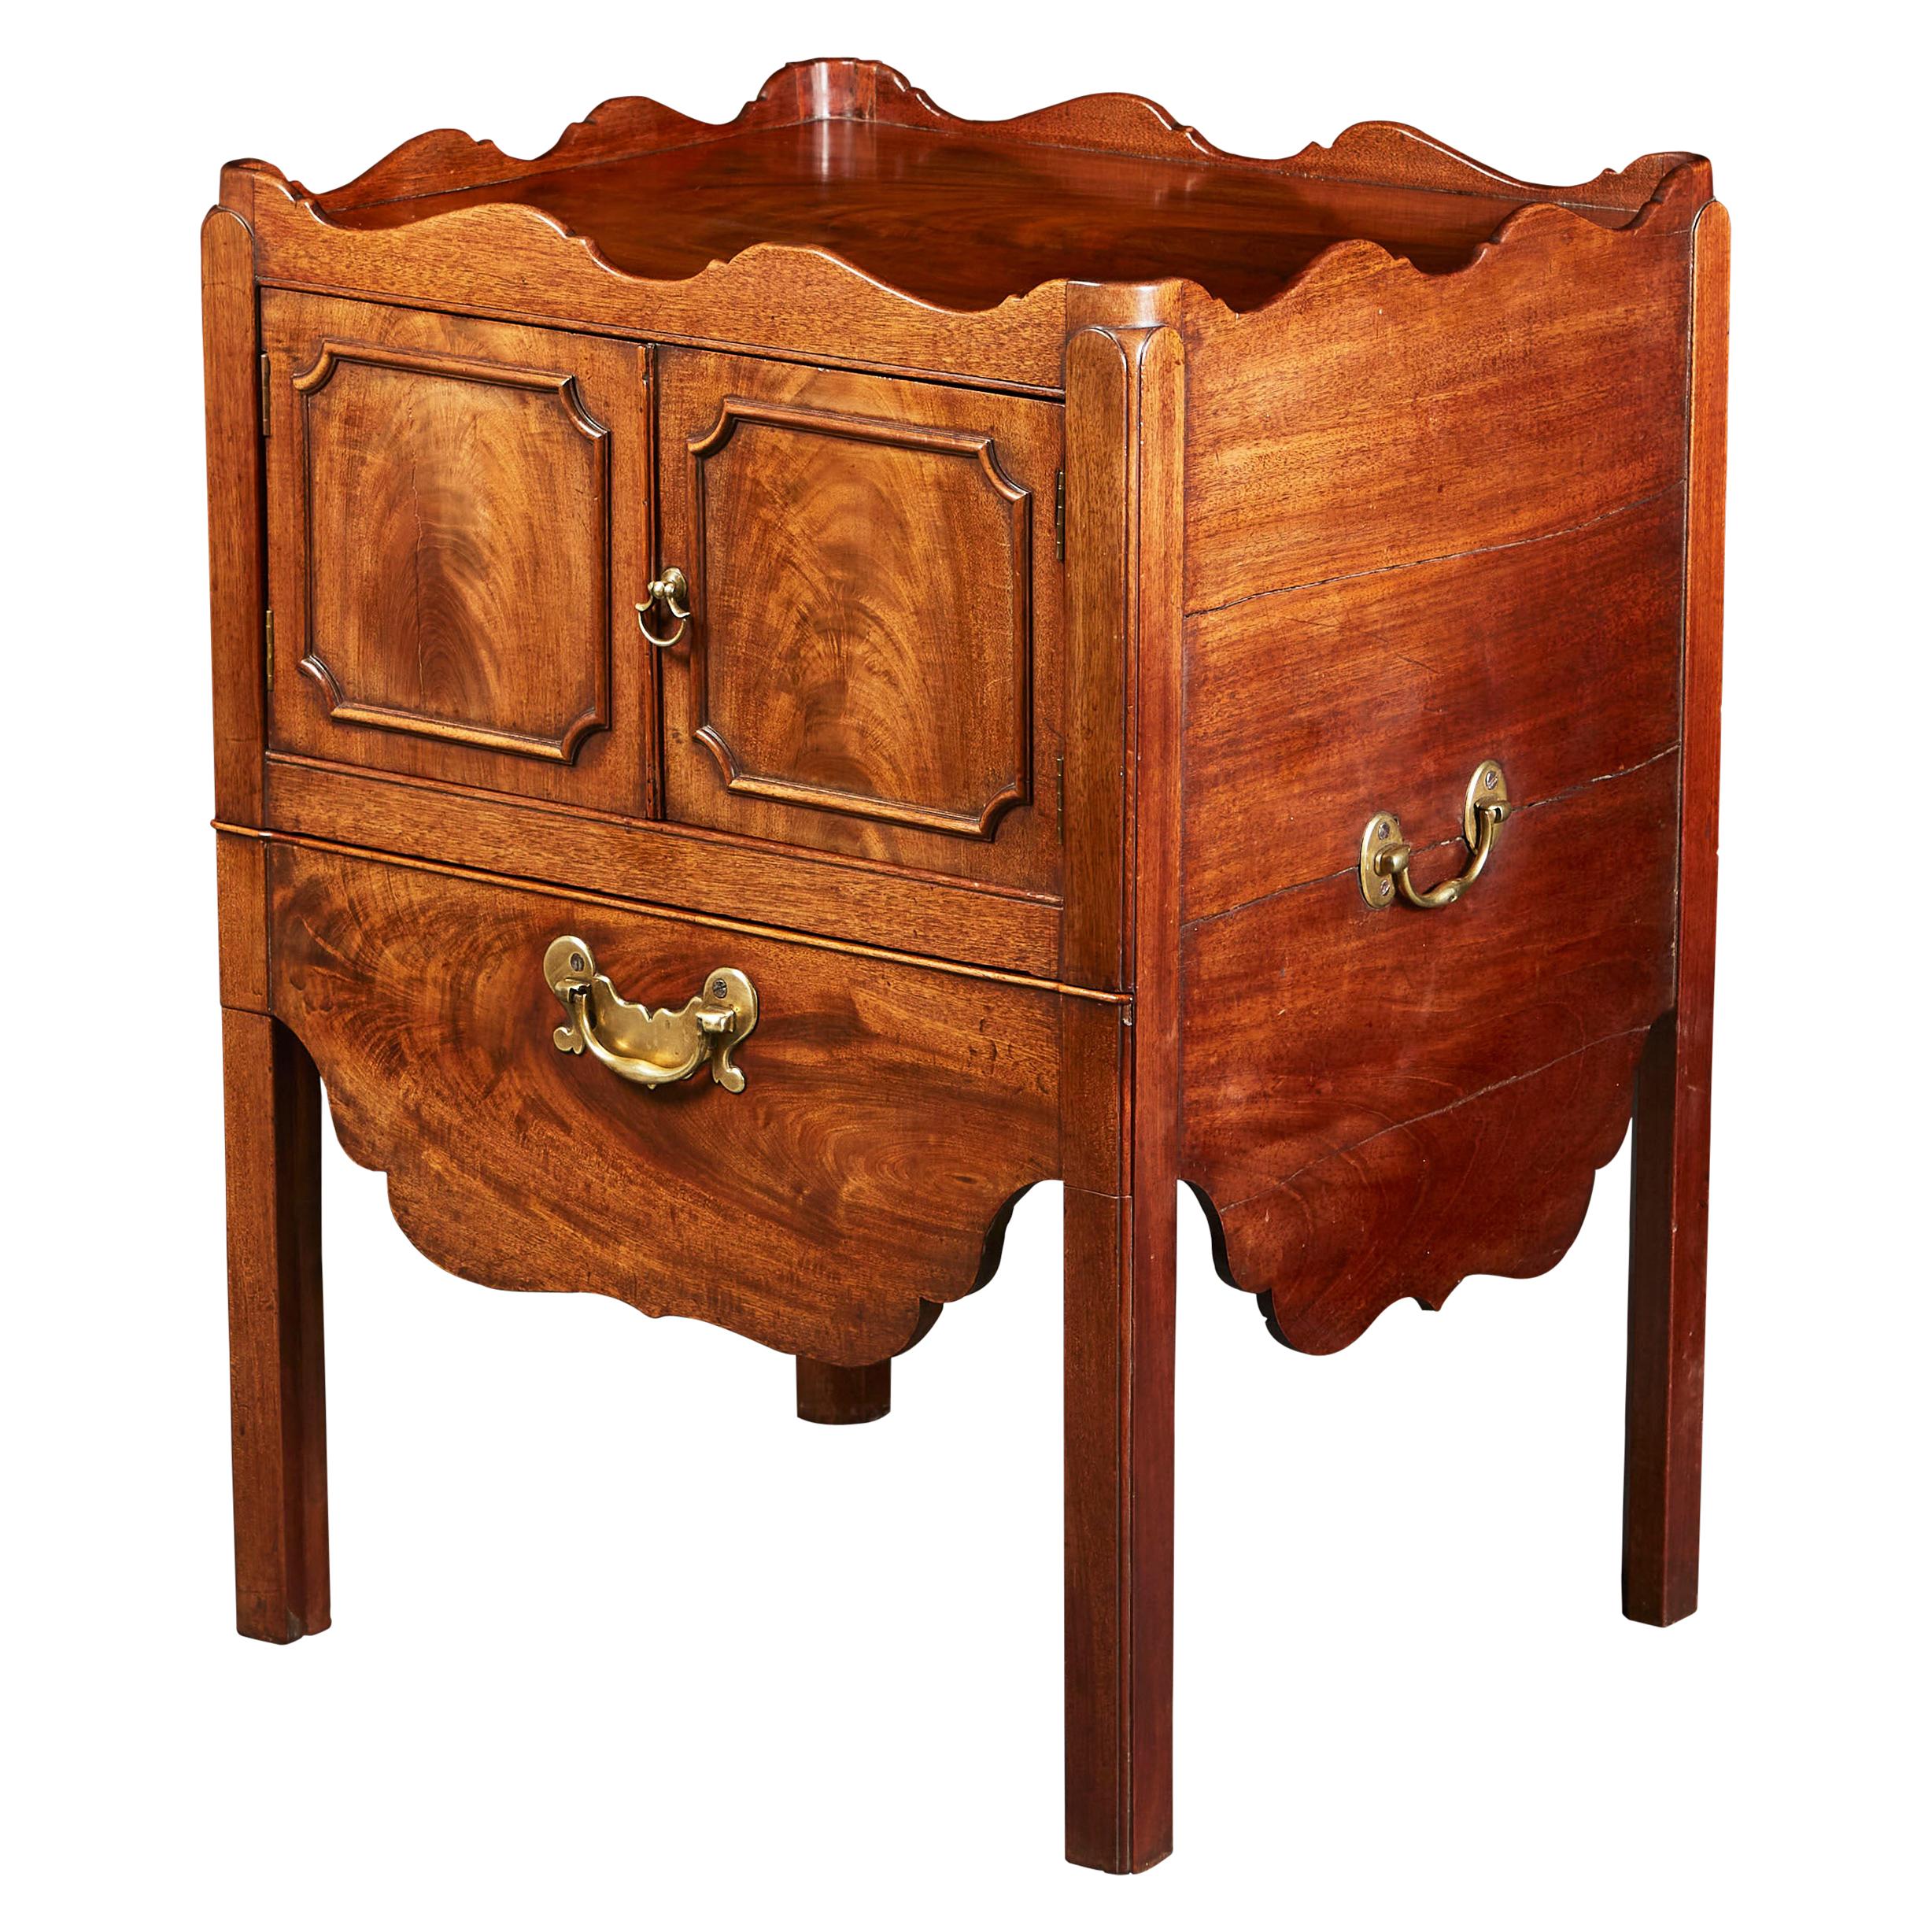 Georgian Flame Mahogany Wood Bedside Cabinet with Brass Handles